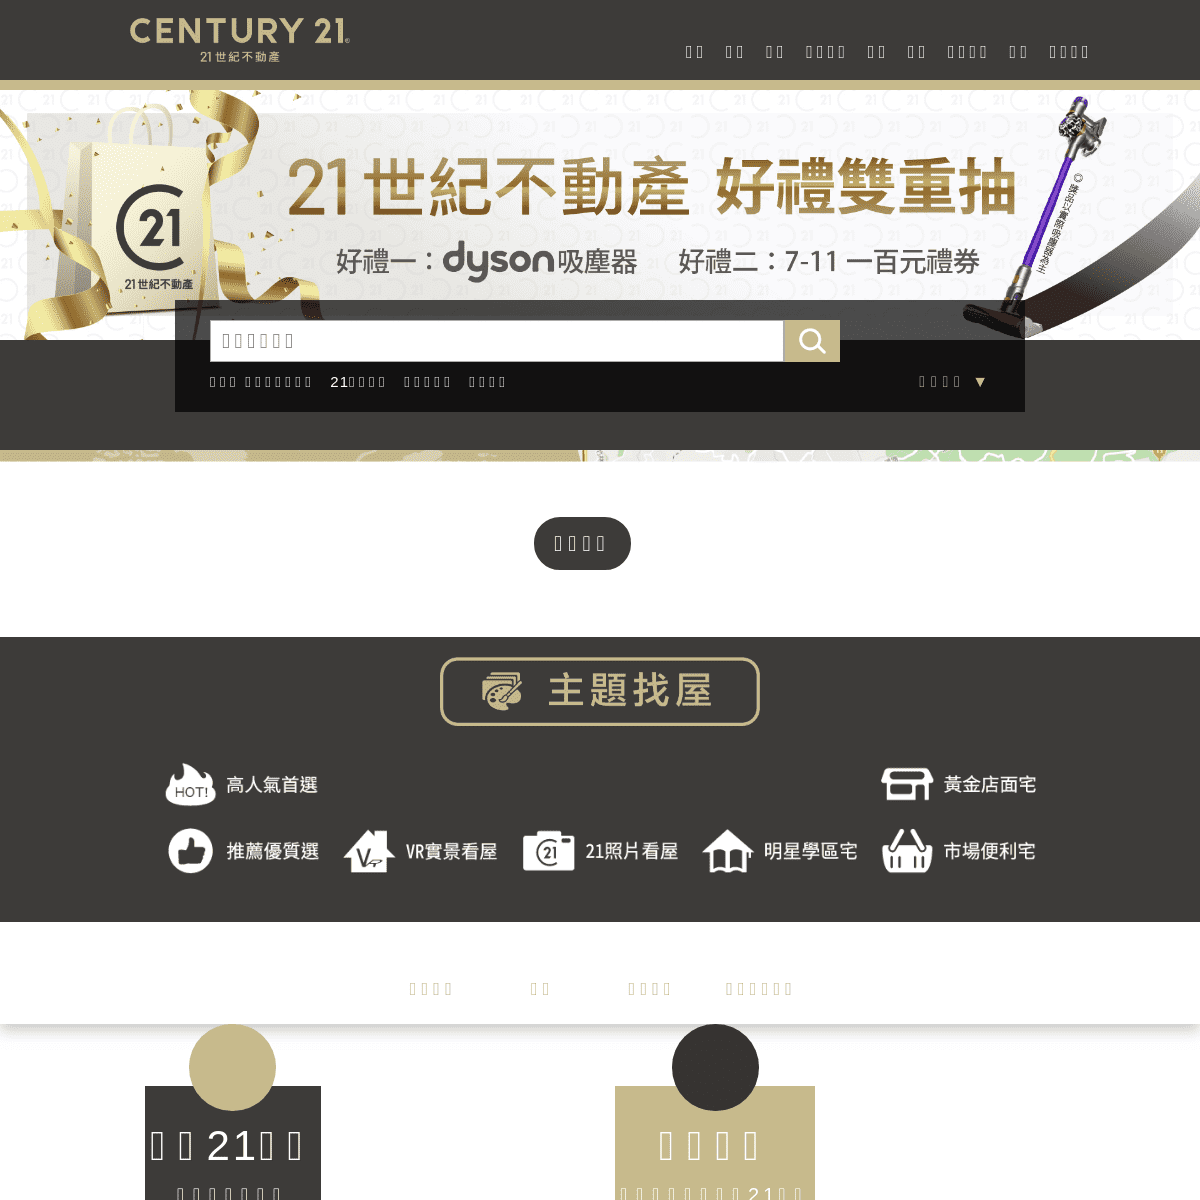 A complete backup of century21.com.tw